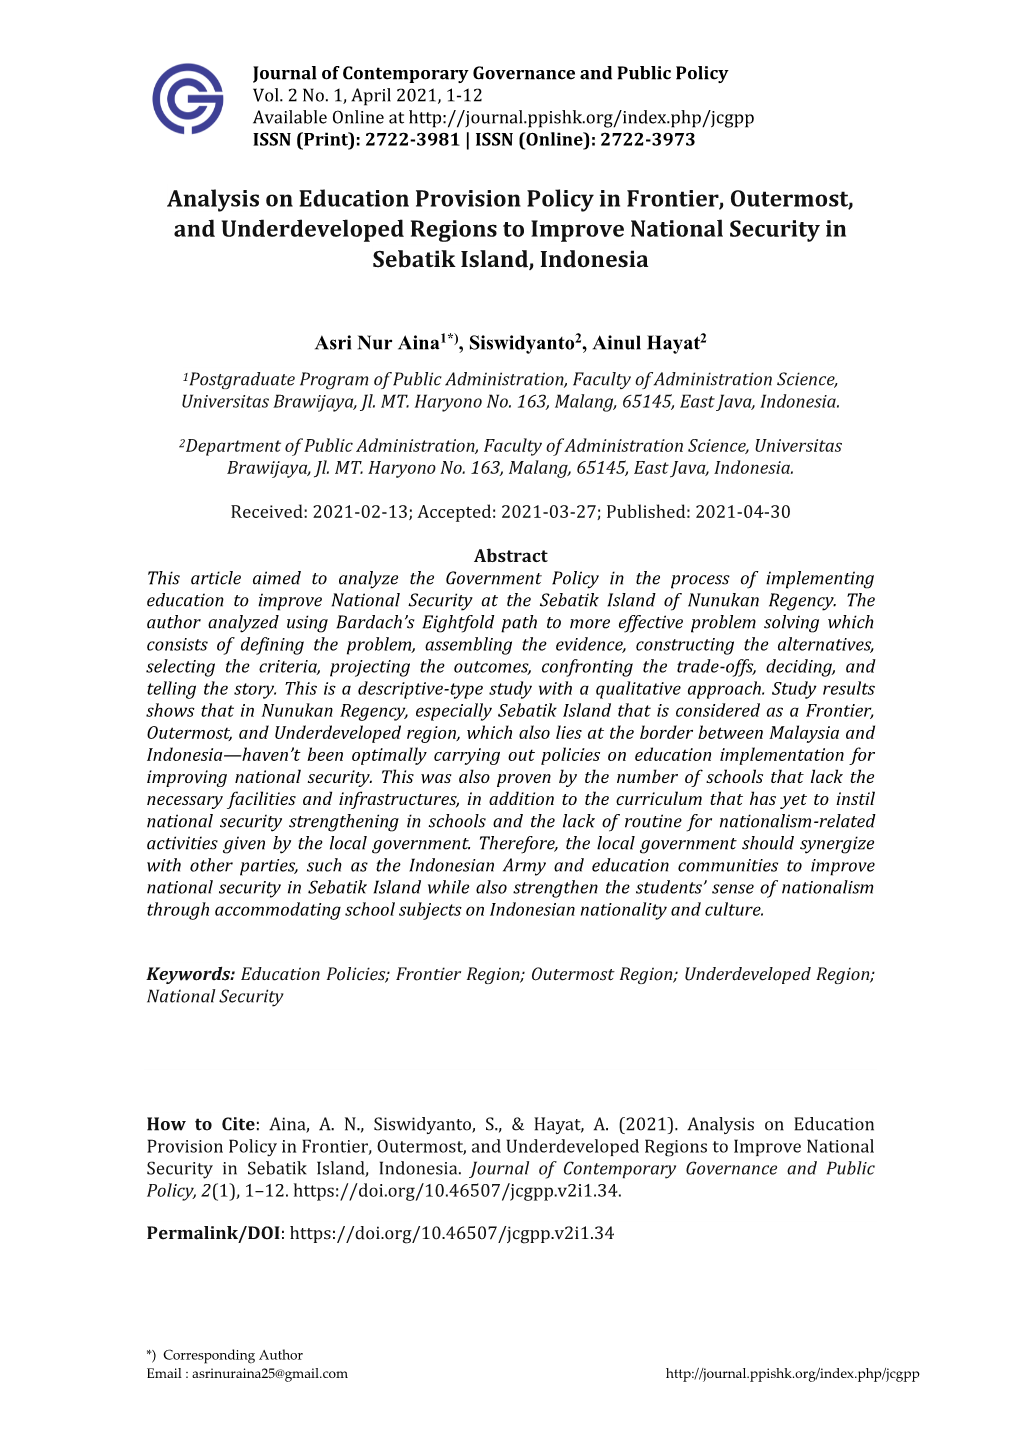 Analysis on Education Provision Policy in Frontier, Outermost, and Underdeveloped Regions to Improve National Security in Sebatik Island, Indonesia